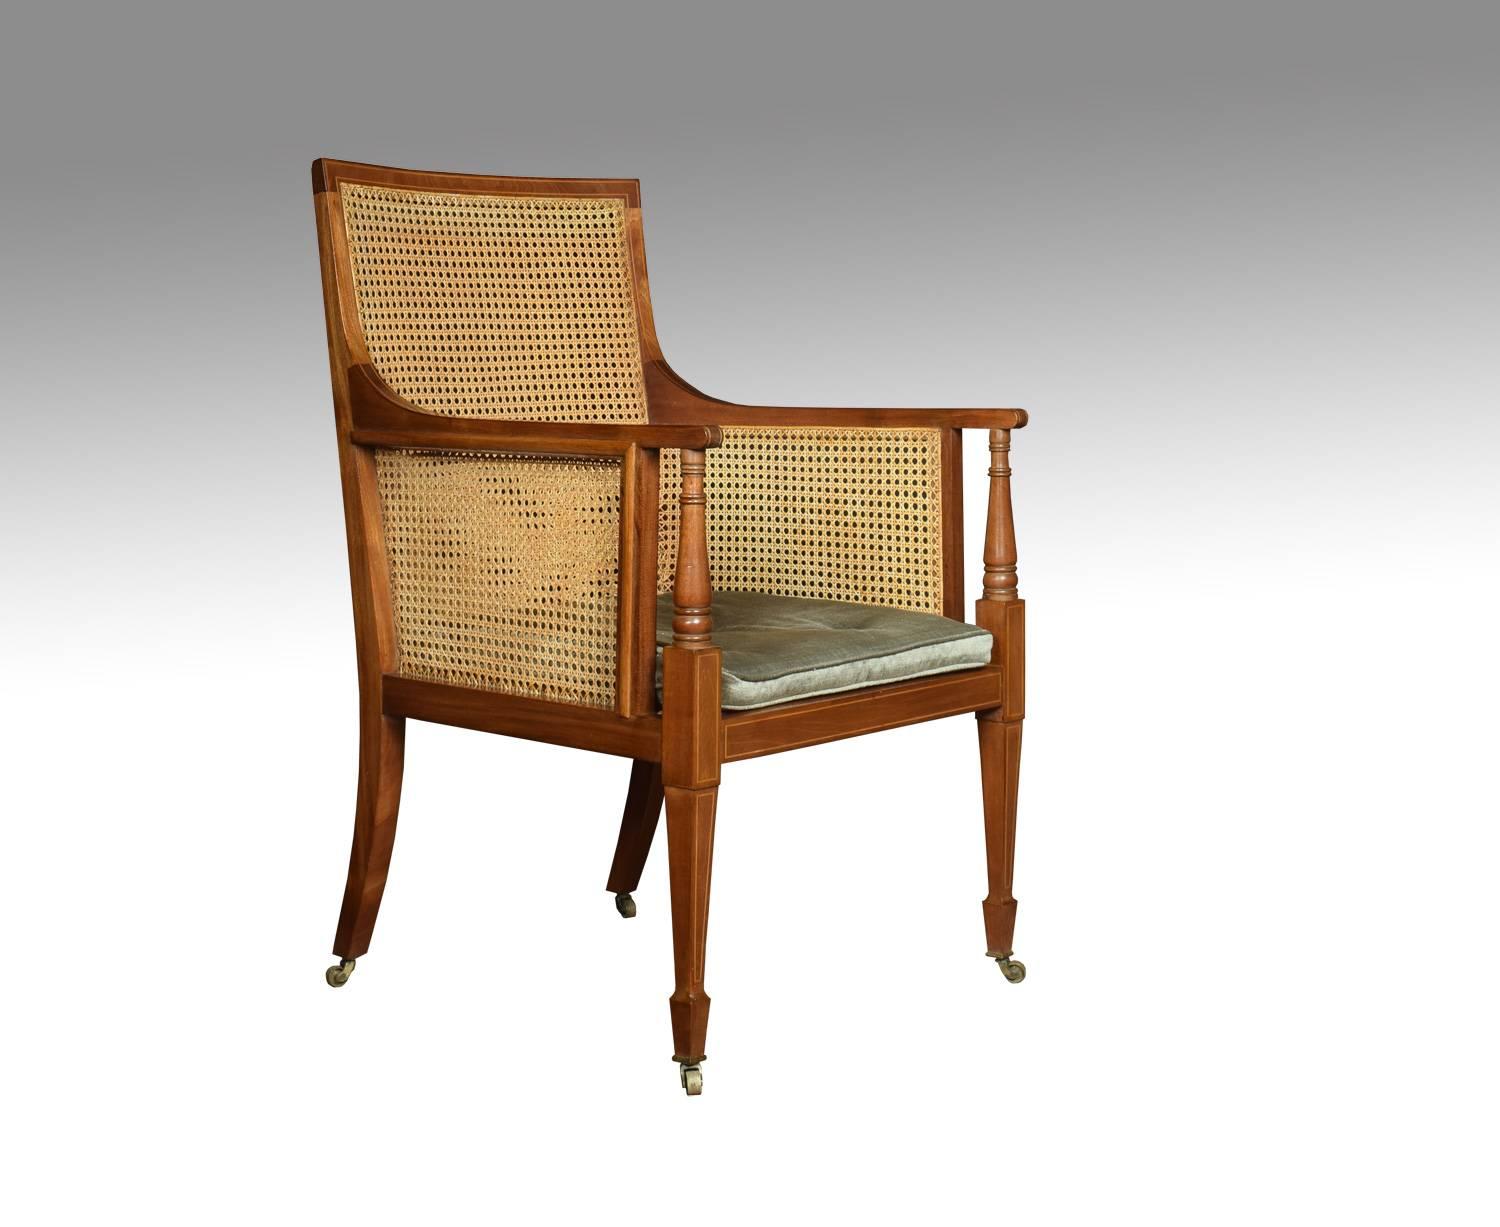 Edwardian string inlaid armchair, with solid mahogany frame and inset bergere back and seat with removable buttoned cushion. Raised up on tapering legs and spade feet. Terminating in brass caps and castors.

Dimensions:
Height 39 inches, height